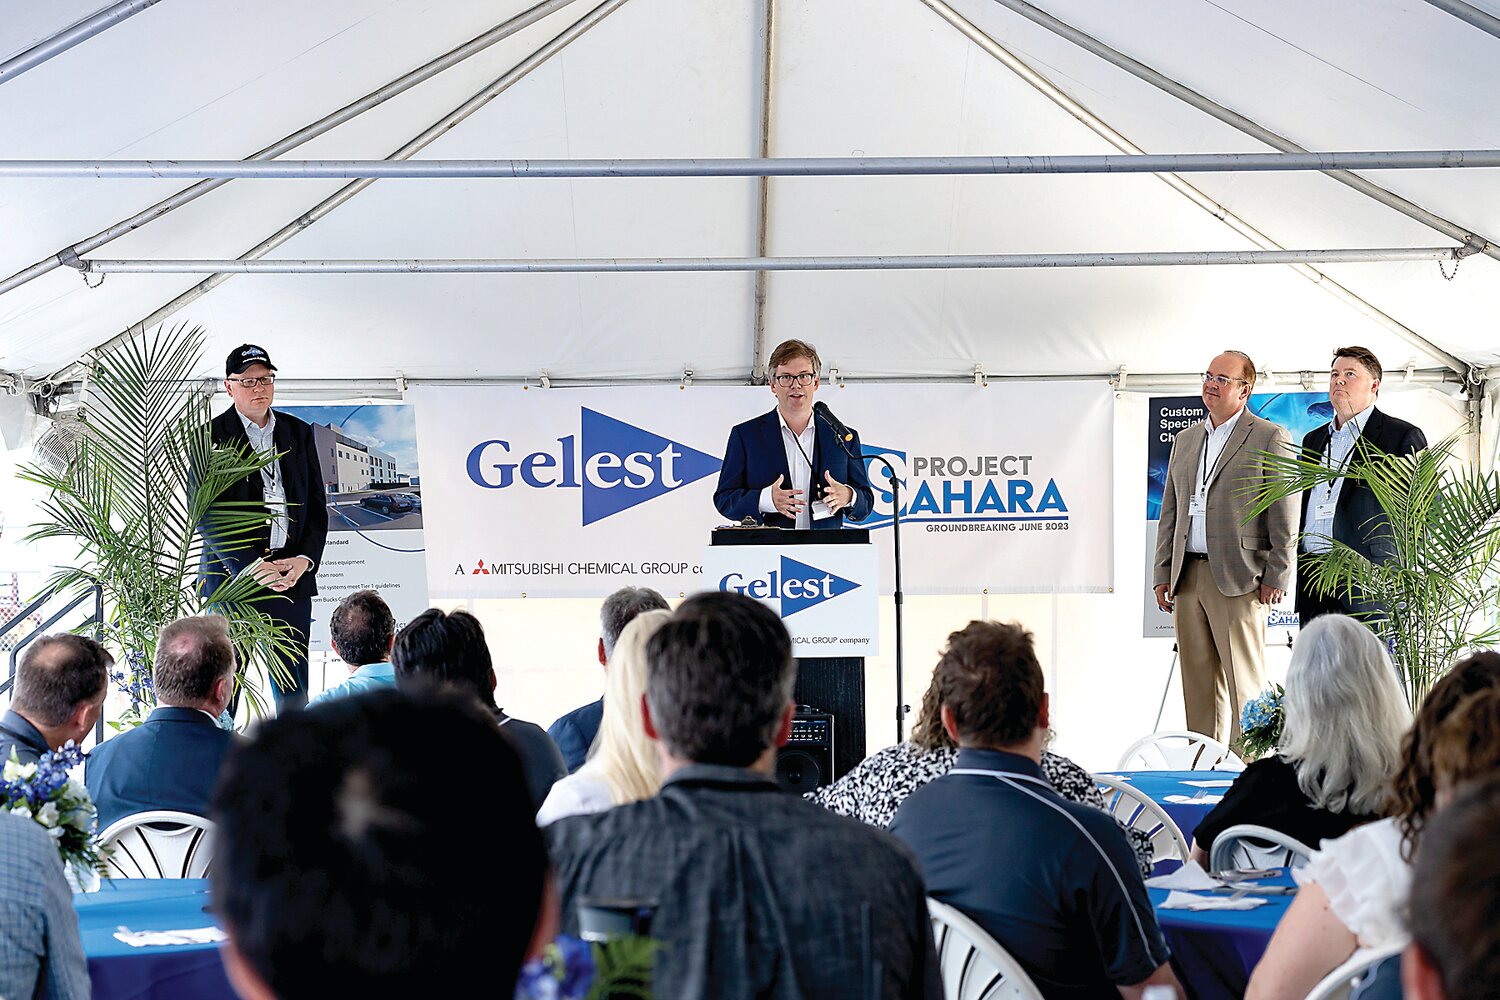 Dr. Jonathan Goff, Gelest president, discusses the company’s strengths and outlook at the groundbreaking celebration for its latest production facility, which will enhance Gelest's production capabilities by supporting a diverse range of customer applications from microelectronics and medical devices to advanced thermal coatings and mobility. From left are Gelest’s Neville Lockwood, senior vice president, operations; Dr. Goff, Tom Moor, vice president, finance, and Edward Kimble, executive vice president.